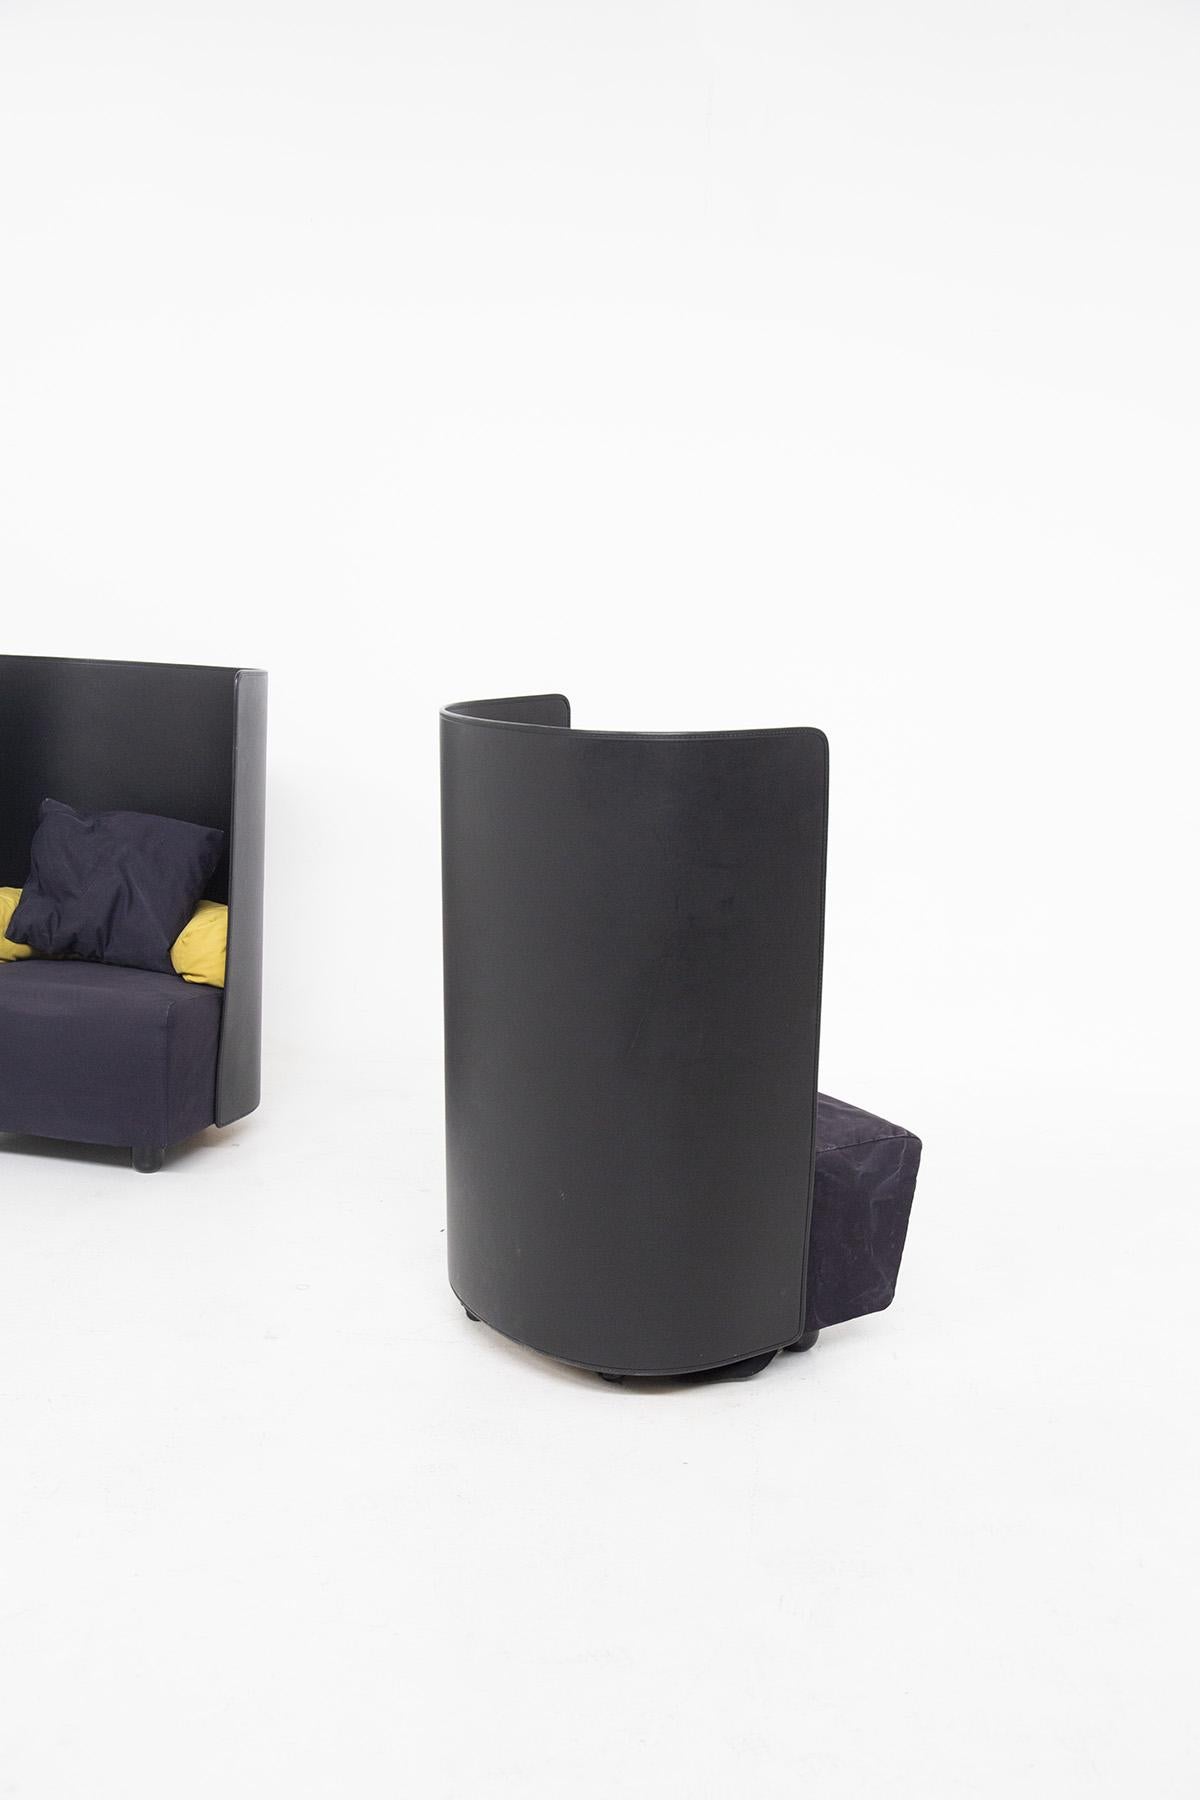 De Pas, D'Urbino and Zanotta Black and Yellow Armchairs For Sale 3